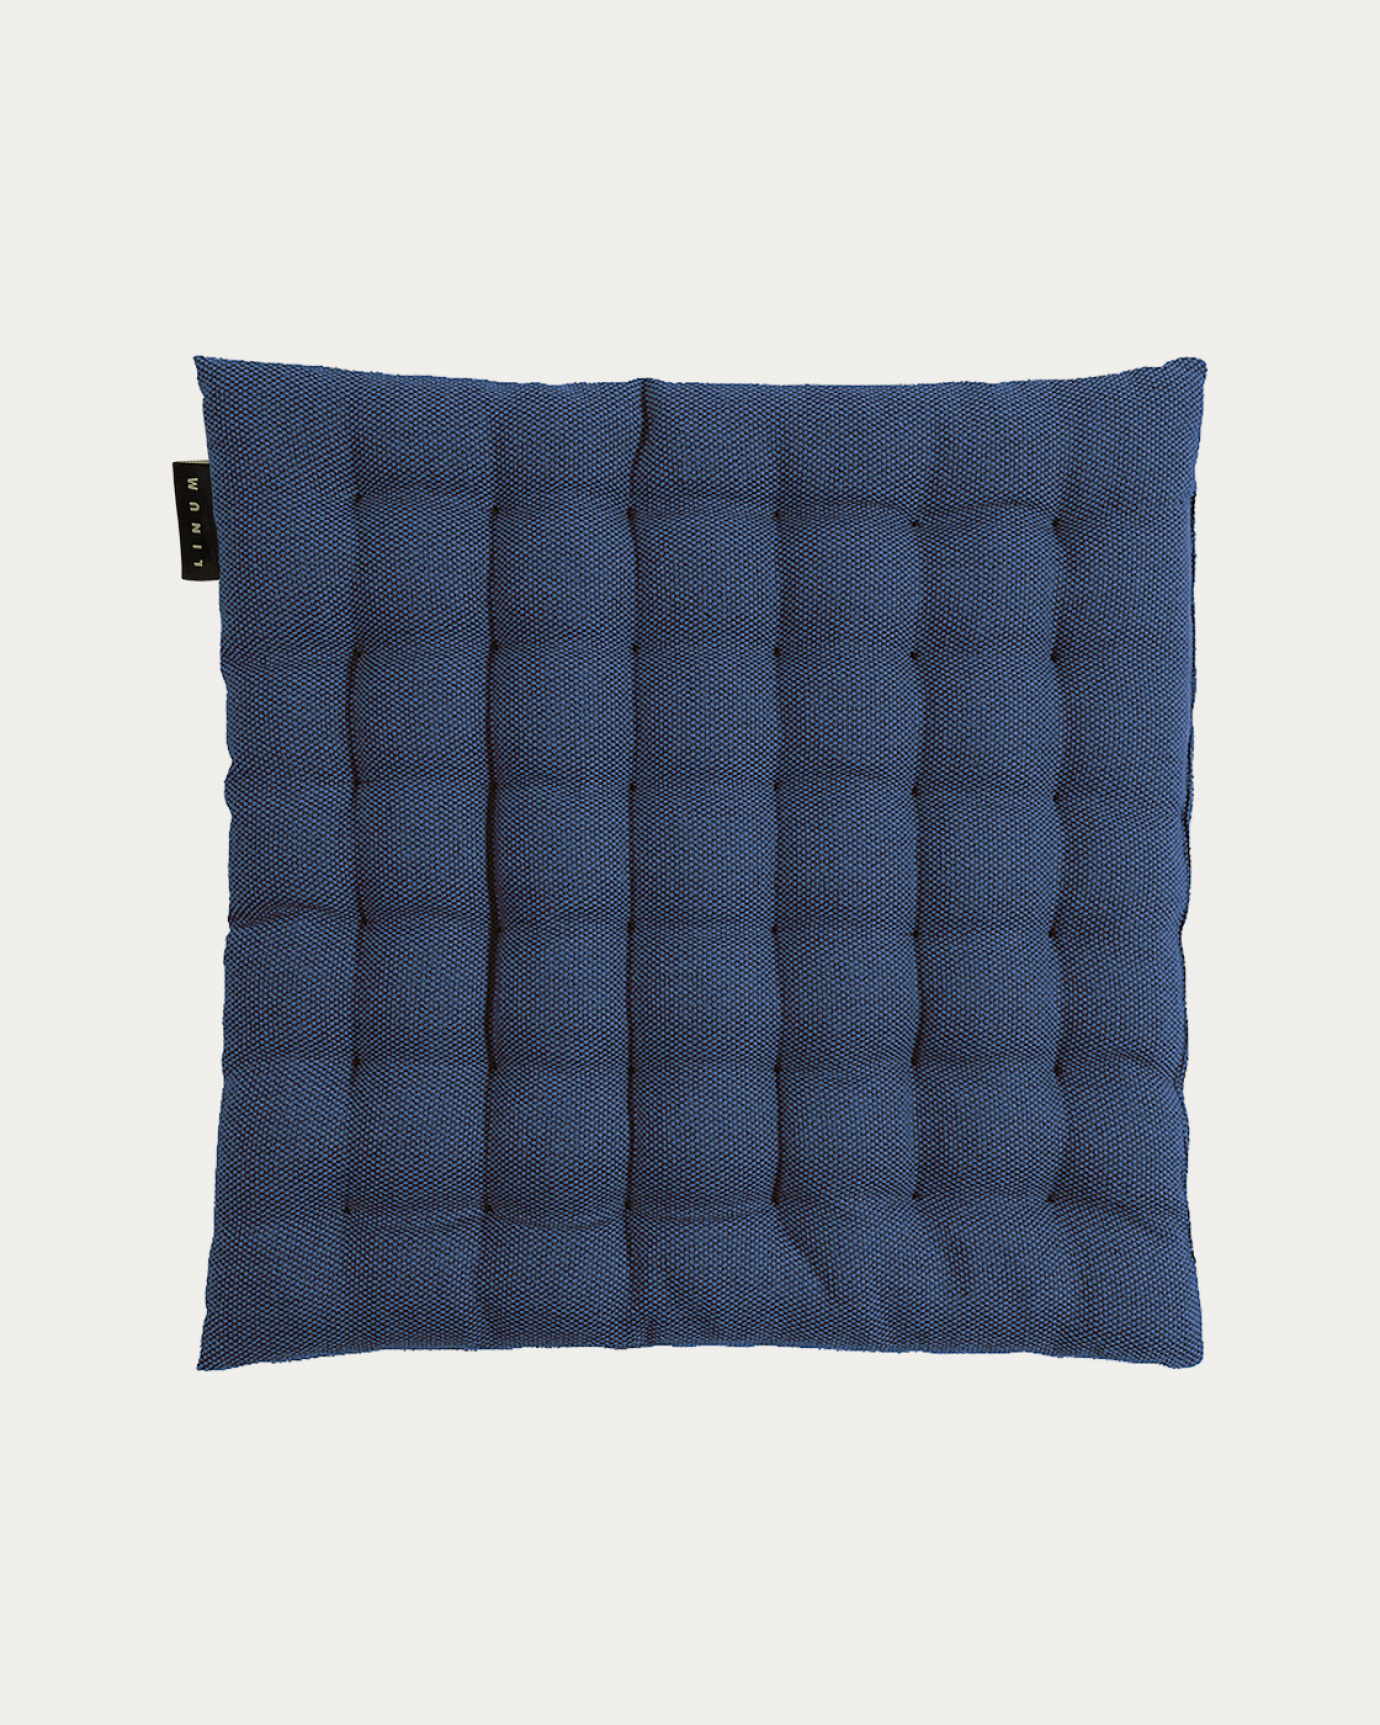 Product image indigo blue PEPPER seat cushion made of soft cotton with recycled polyester filling from LINUM DESIGN. Size 40x40 cm.